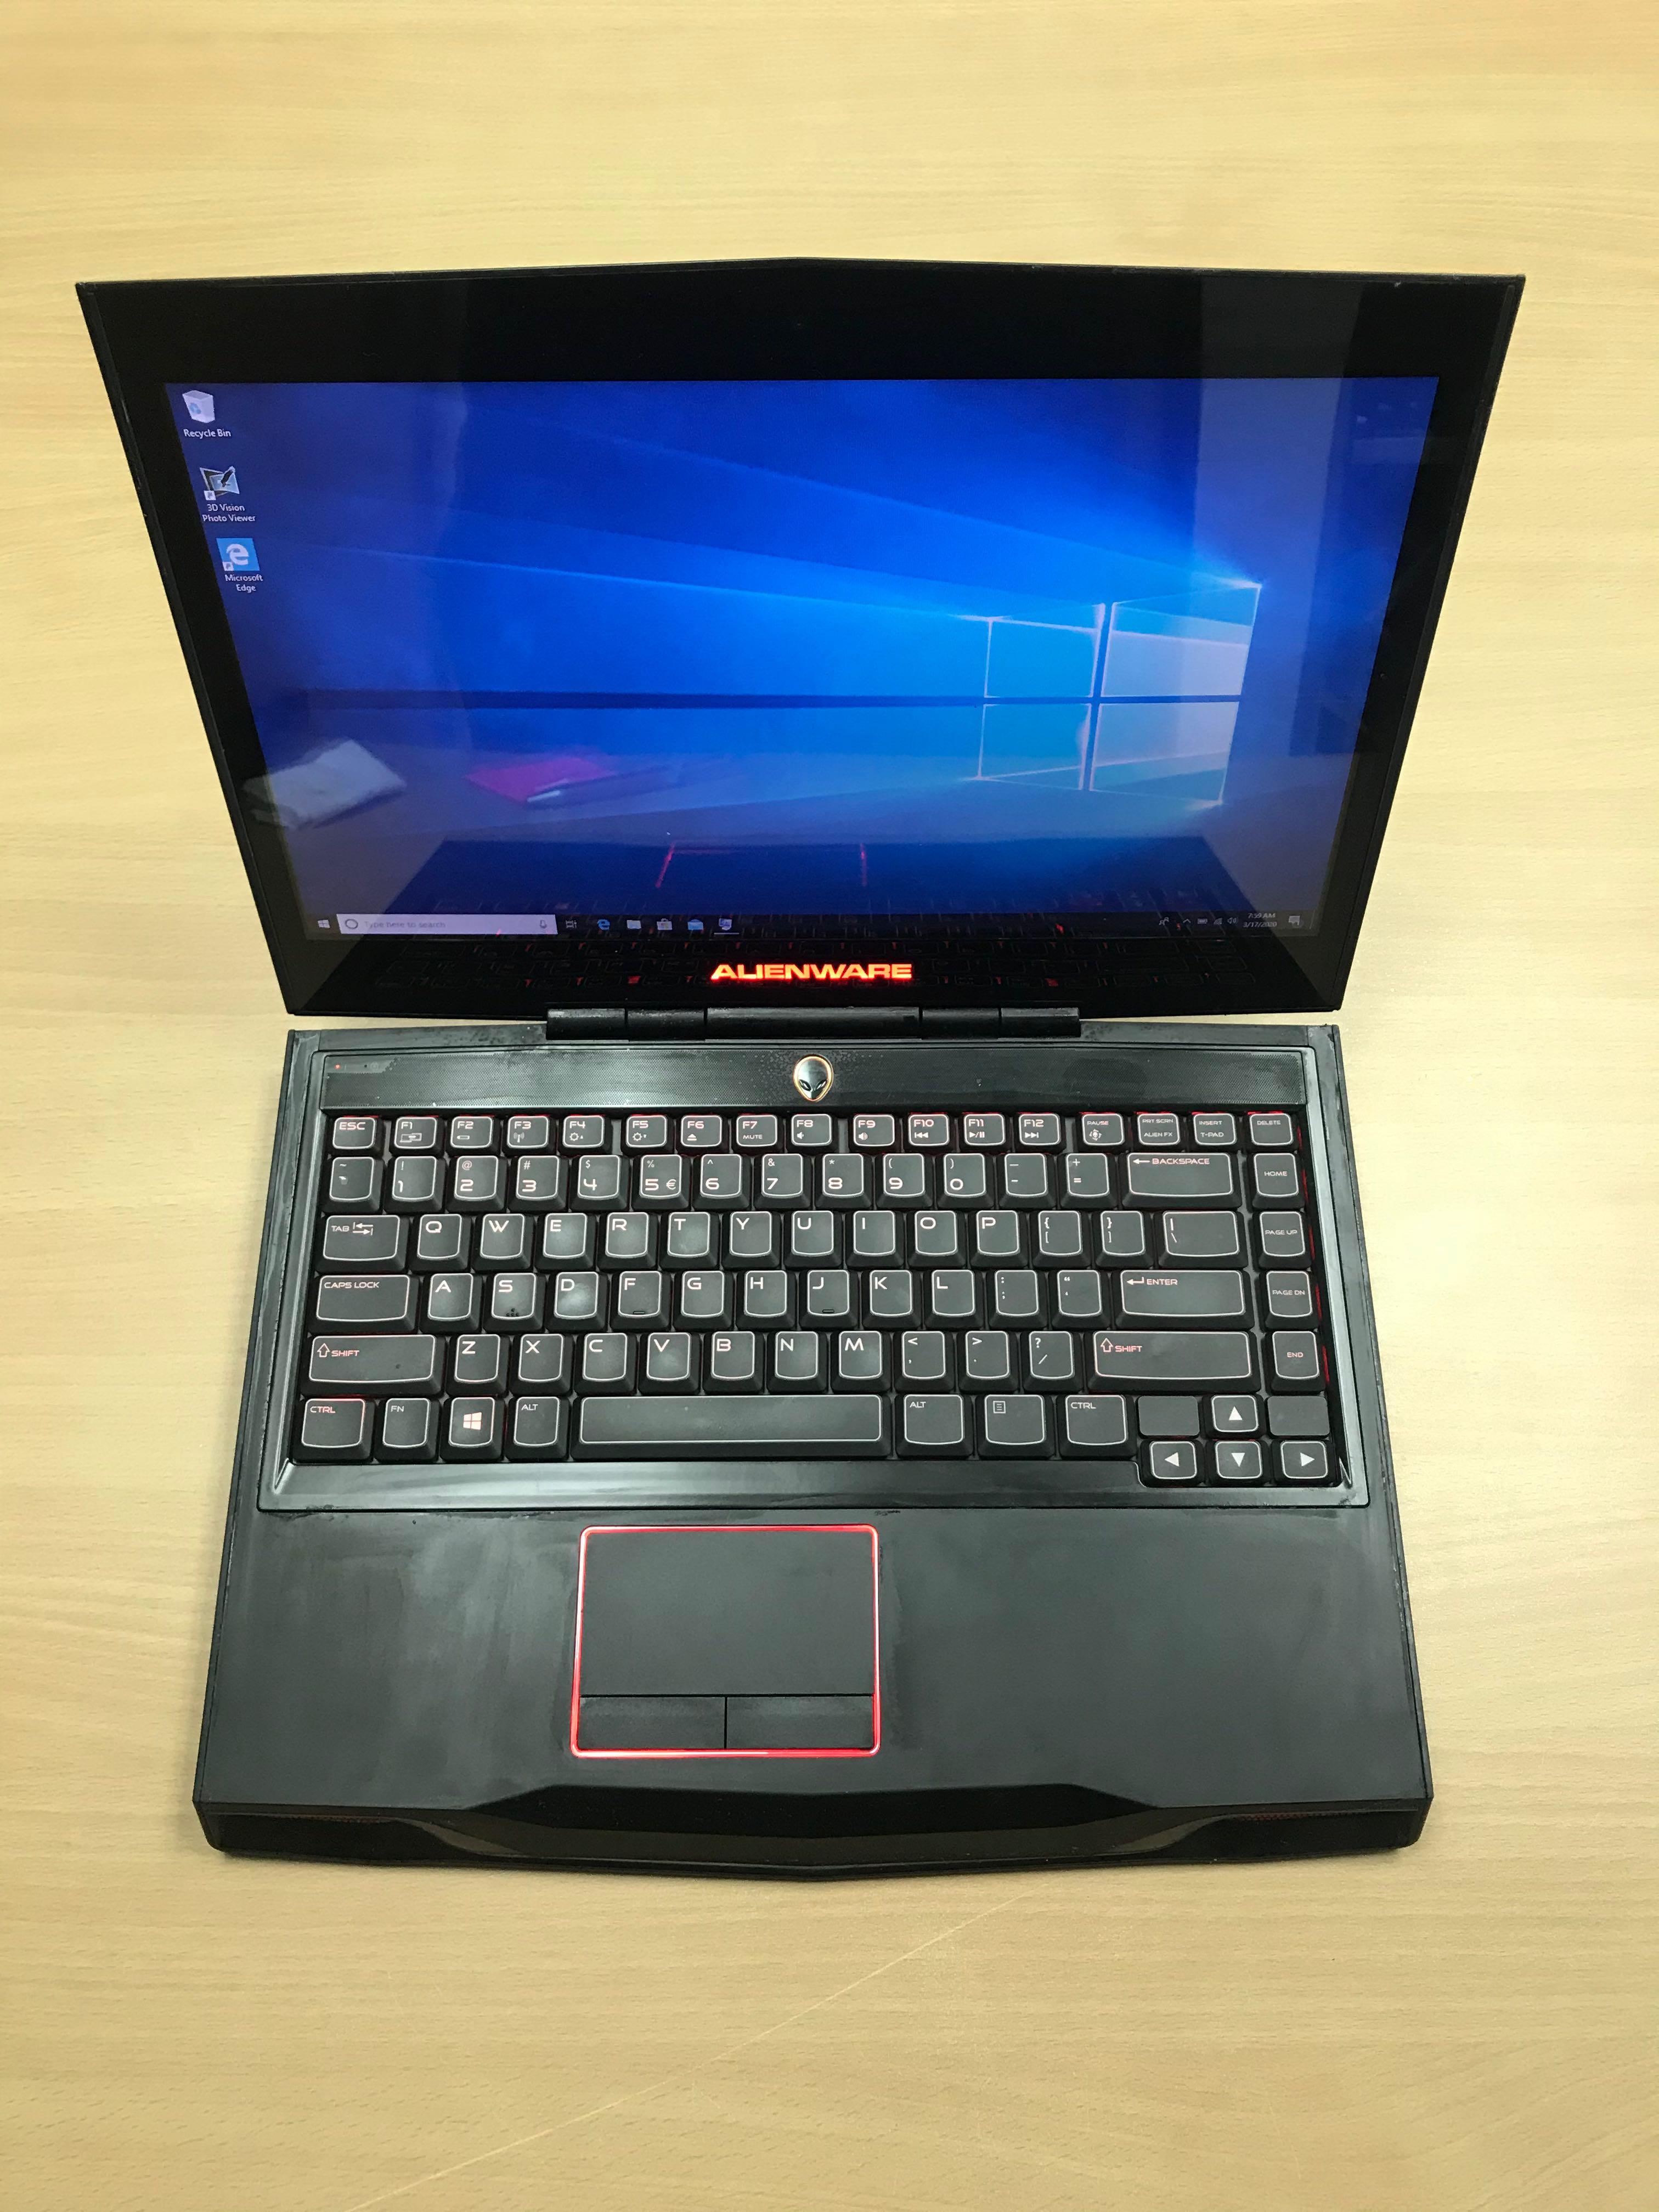 Alienware M14x Gaming Laptop Electronics Computers Laptops On Carousell